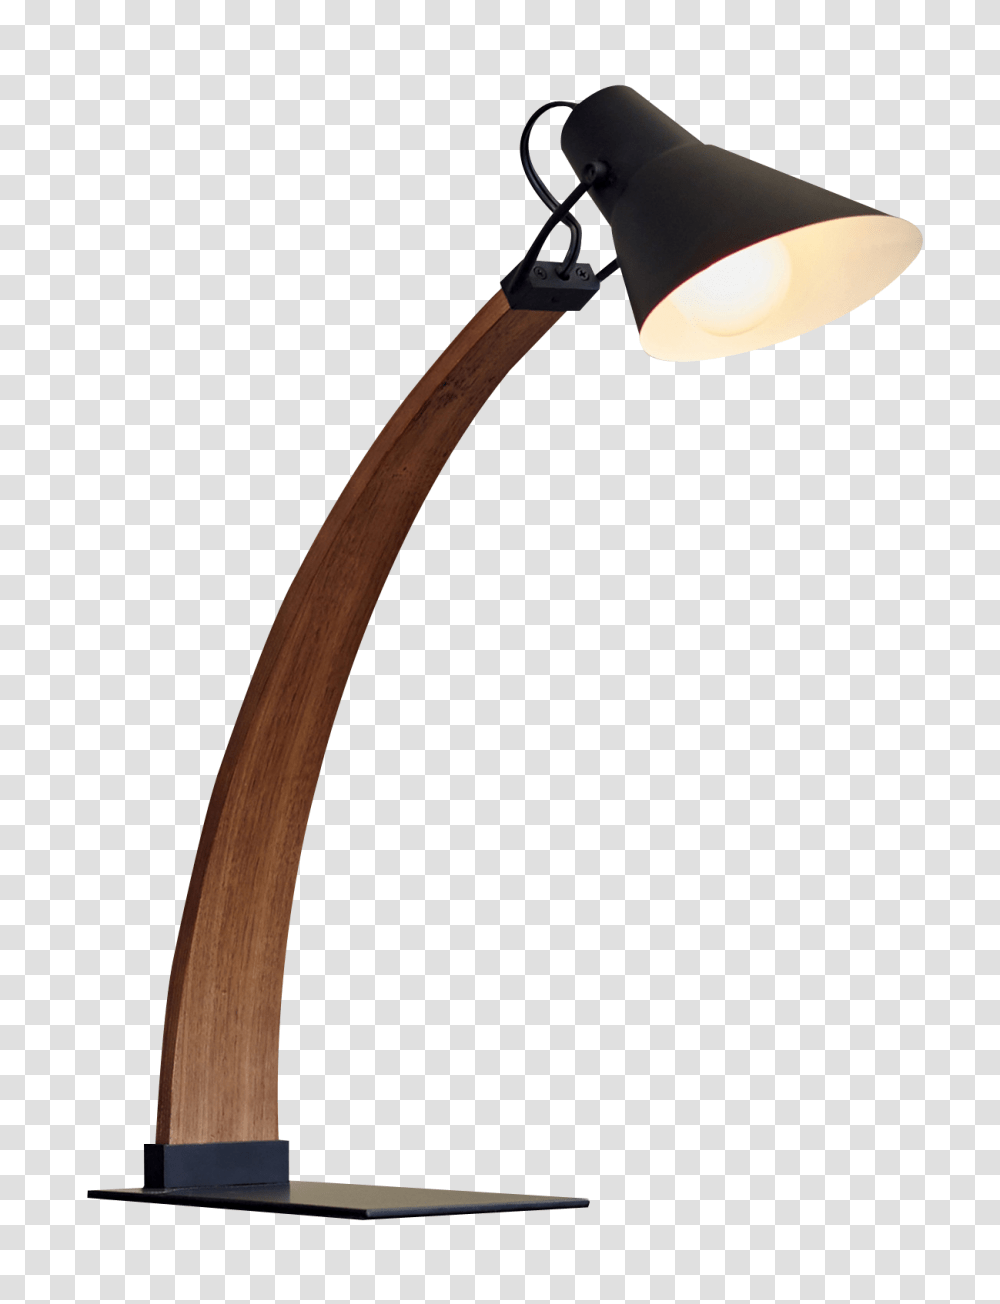 Table Lamp Image, Axe, Tool, Lampshade Transparent Png